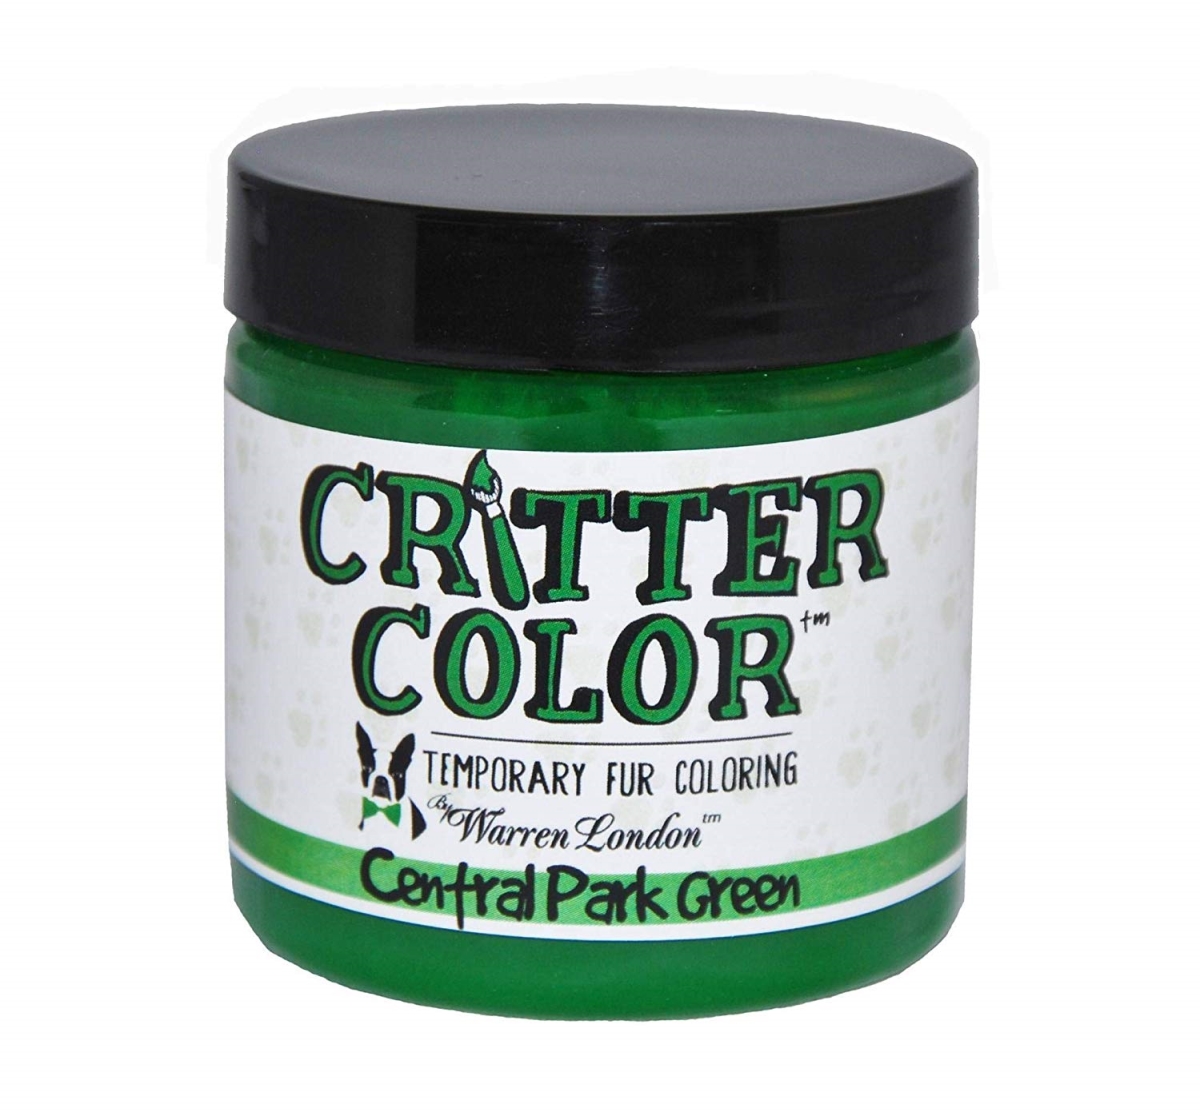 101808 Critter Color Temporary Fur Coloring For Dogs - Central Park Green